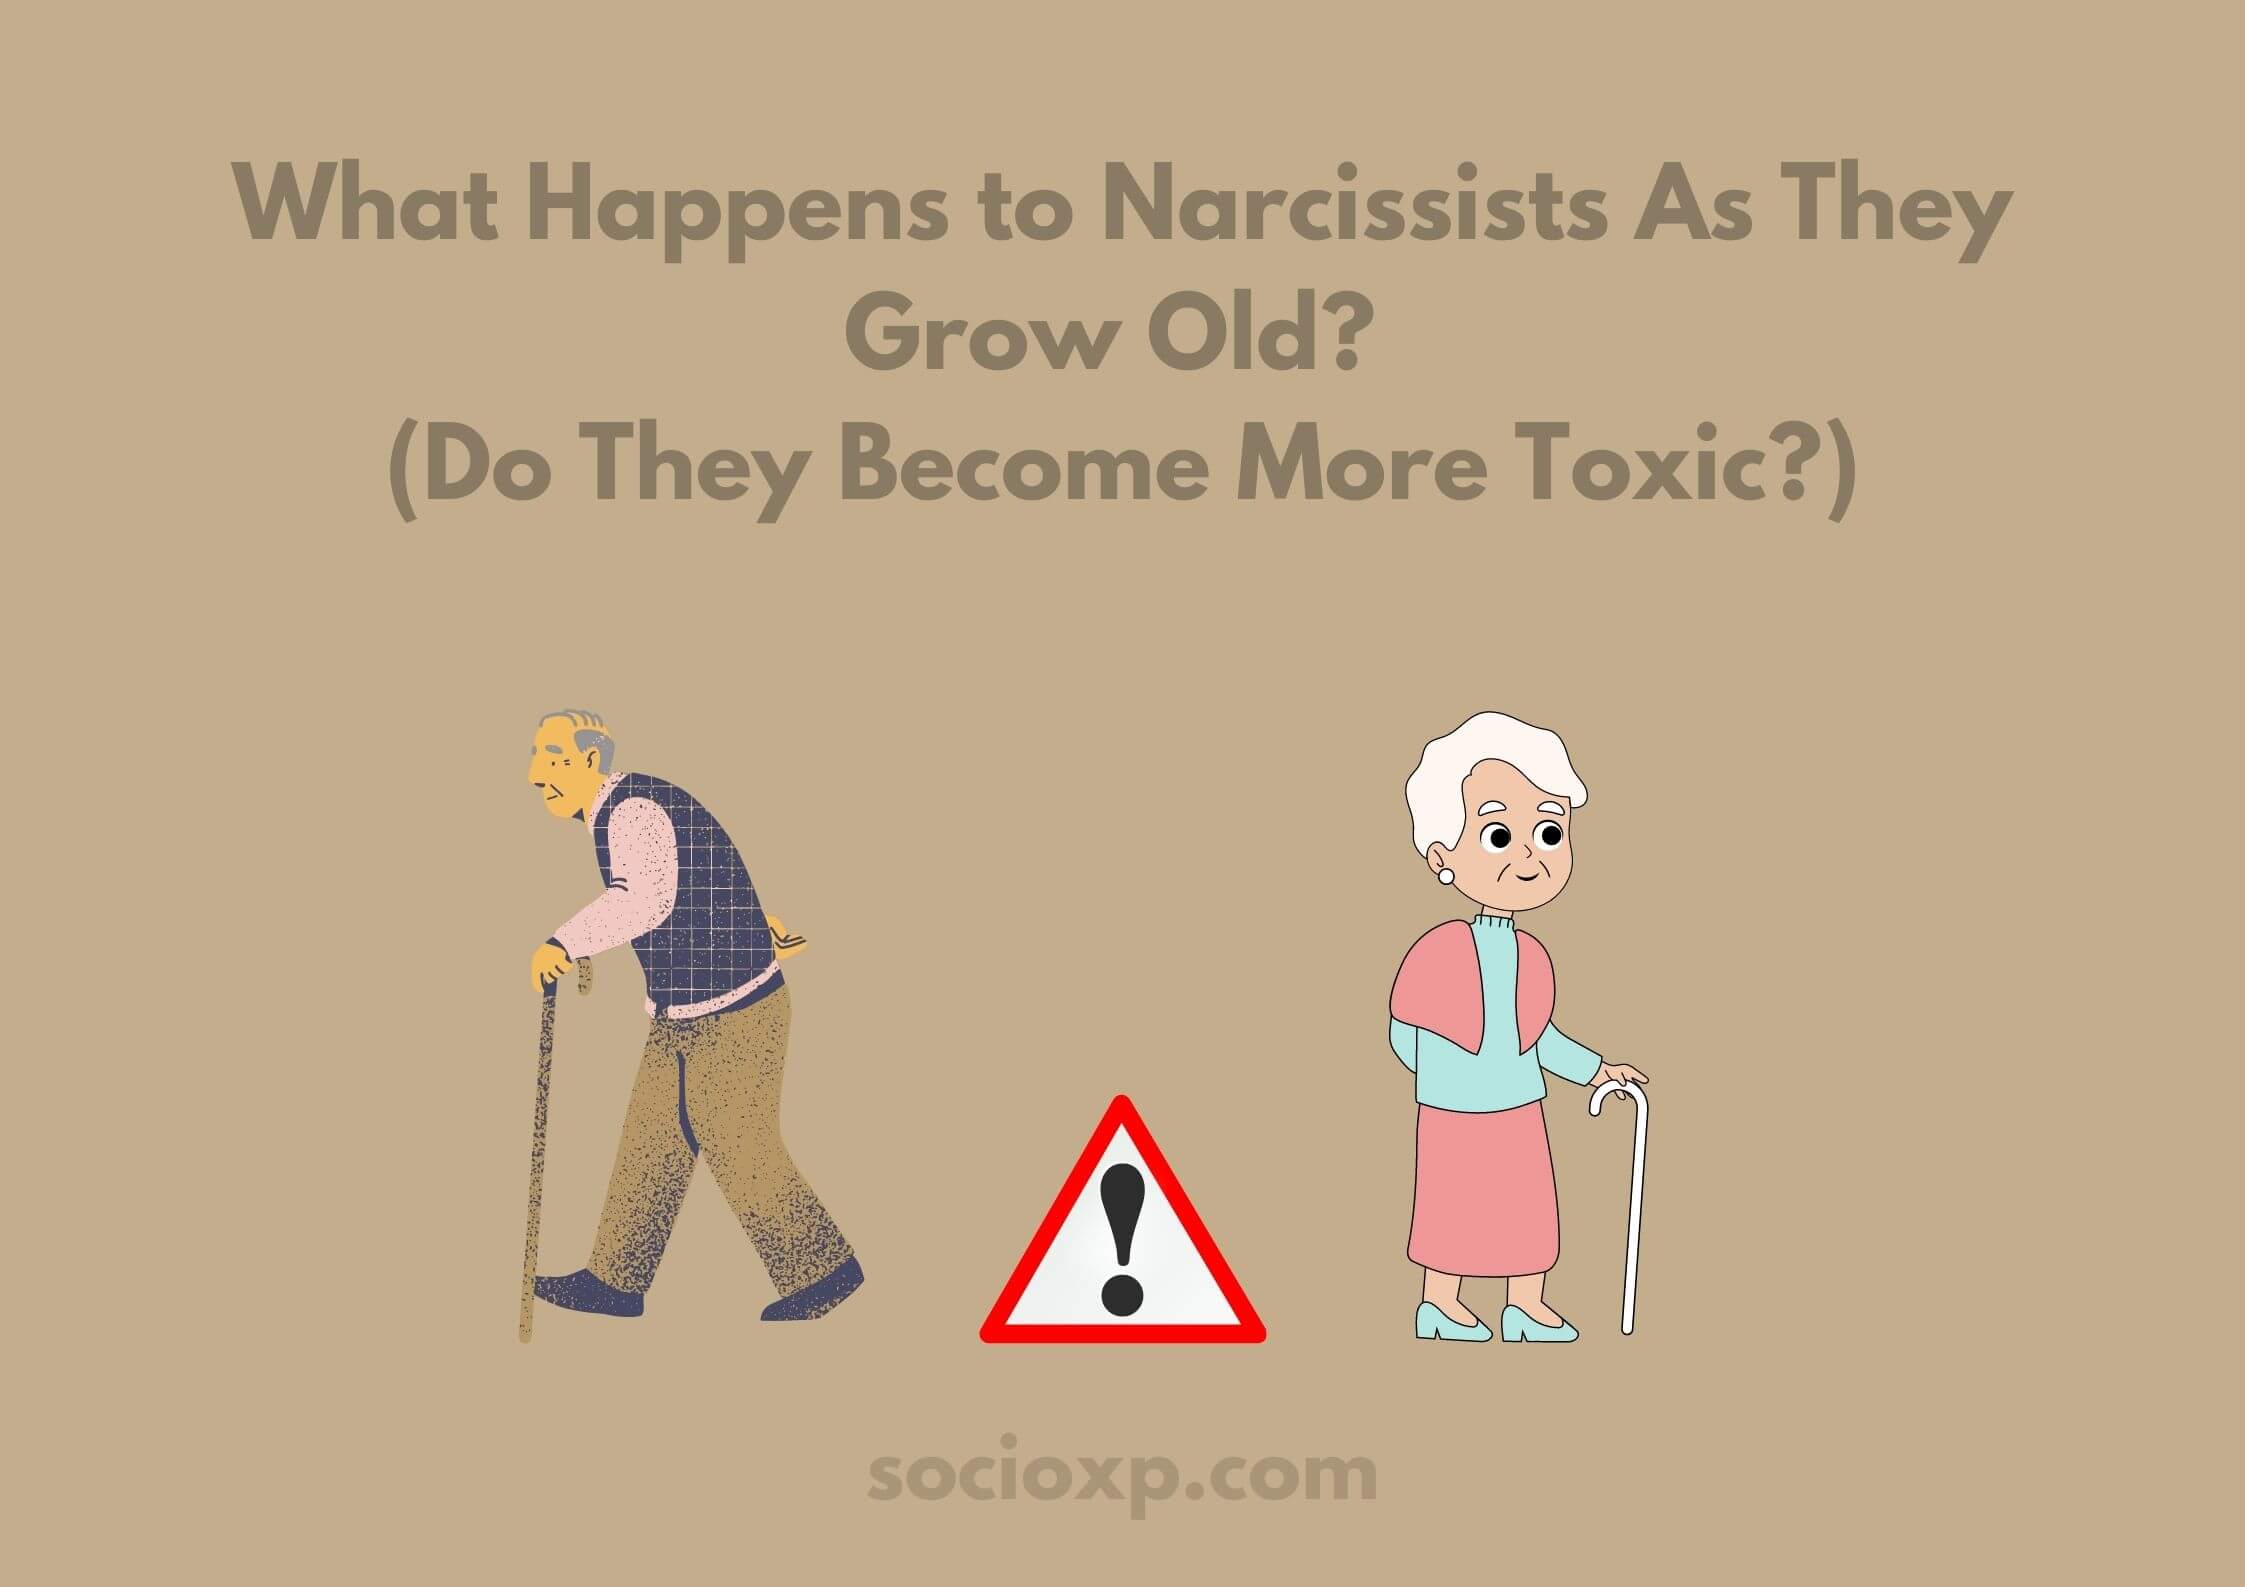 What Happens to Narcissists As They Grow Old? (Do They Become More Toxic?)